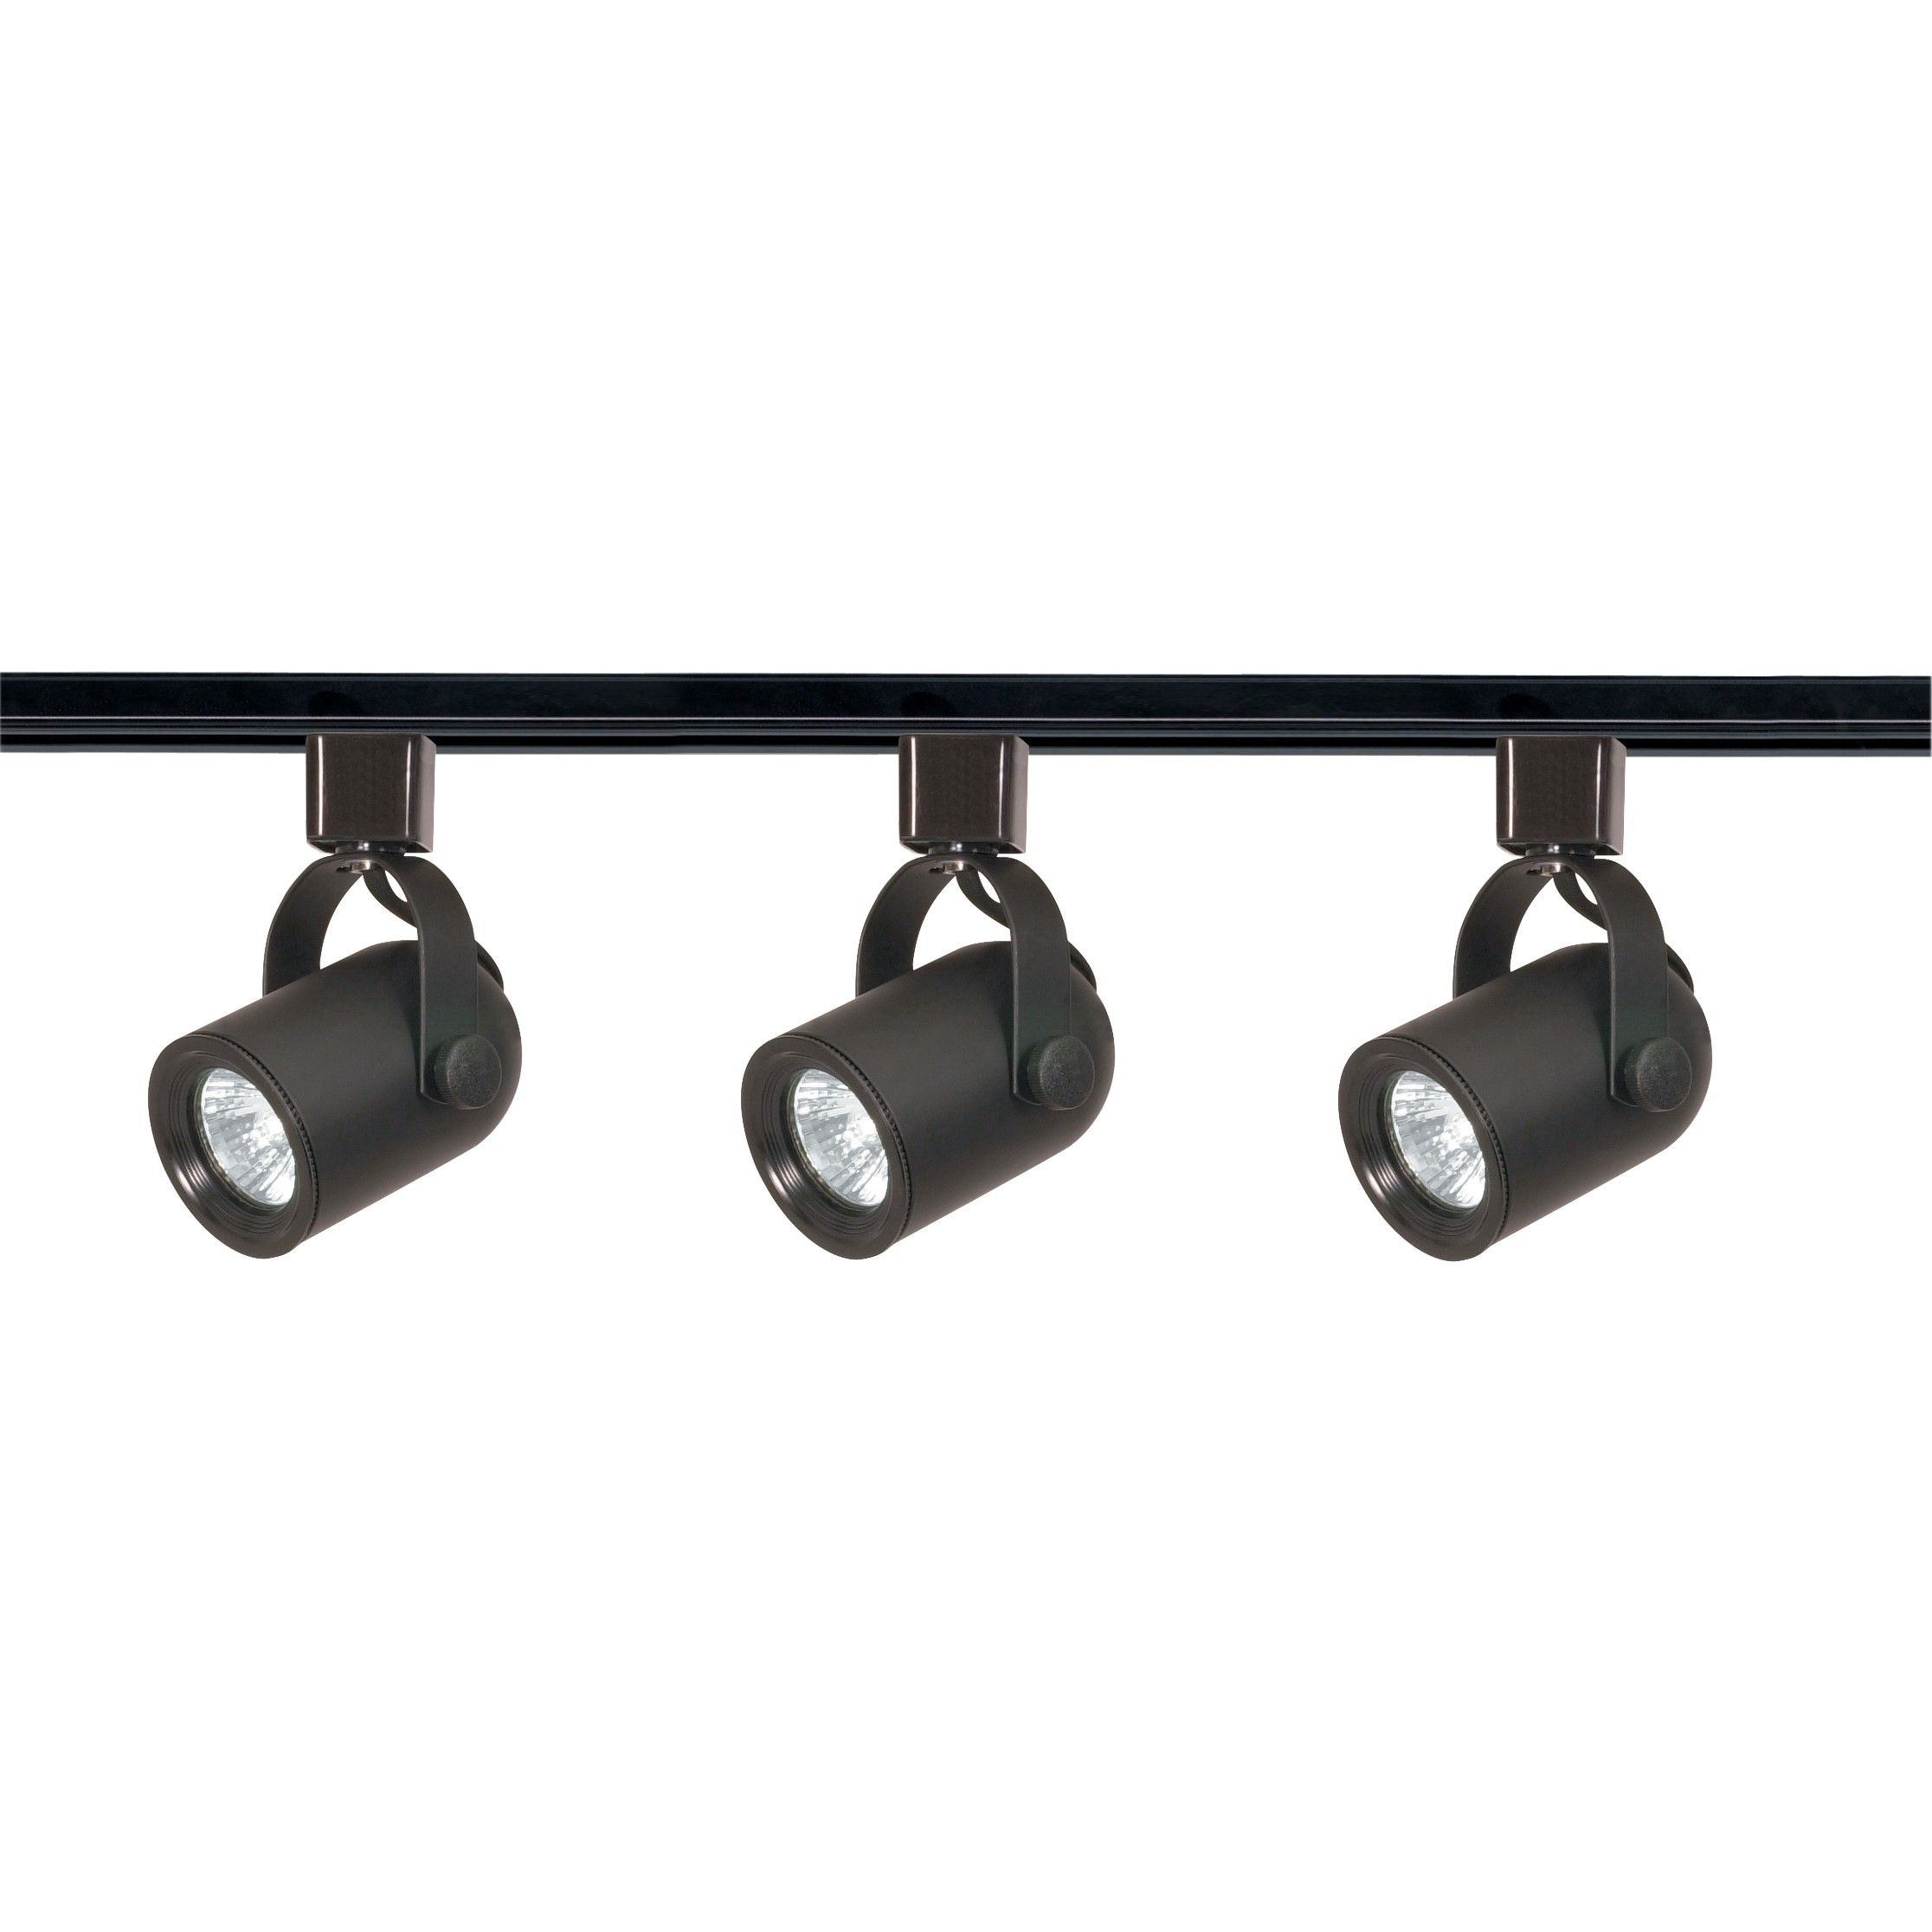 Nuvo Tk349 Line Volt Mr16 Gu10 Round Back Track Lighting Kit Pertaining To Outdoor Ceiling Track Lighting (View 4 of 15)